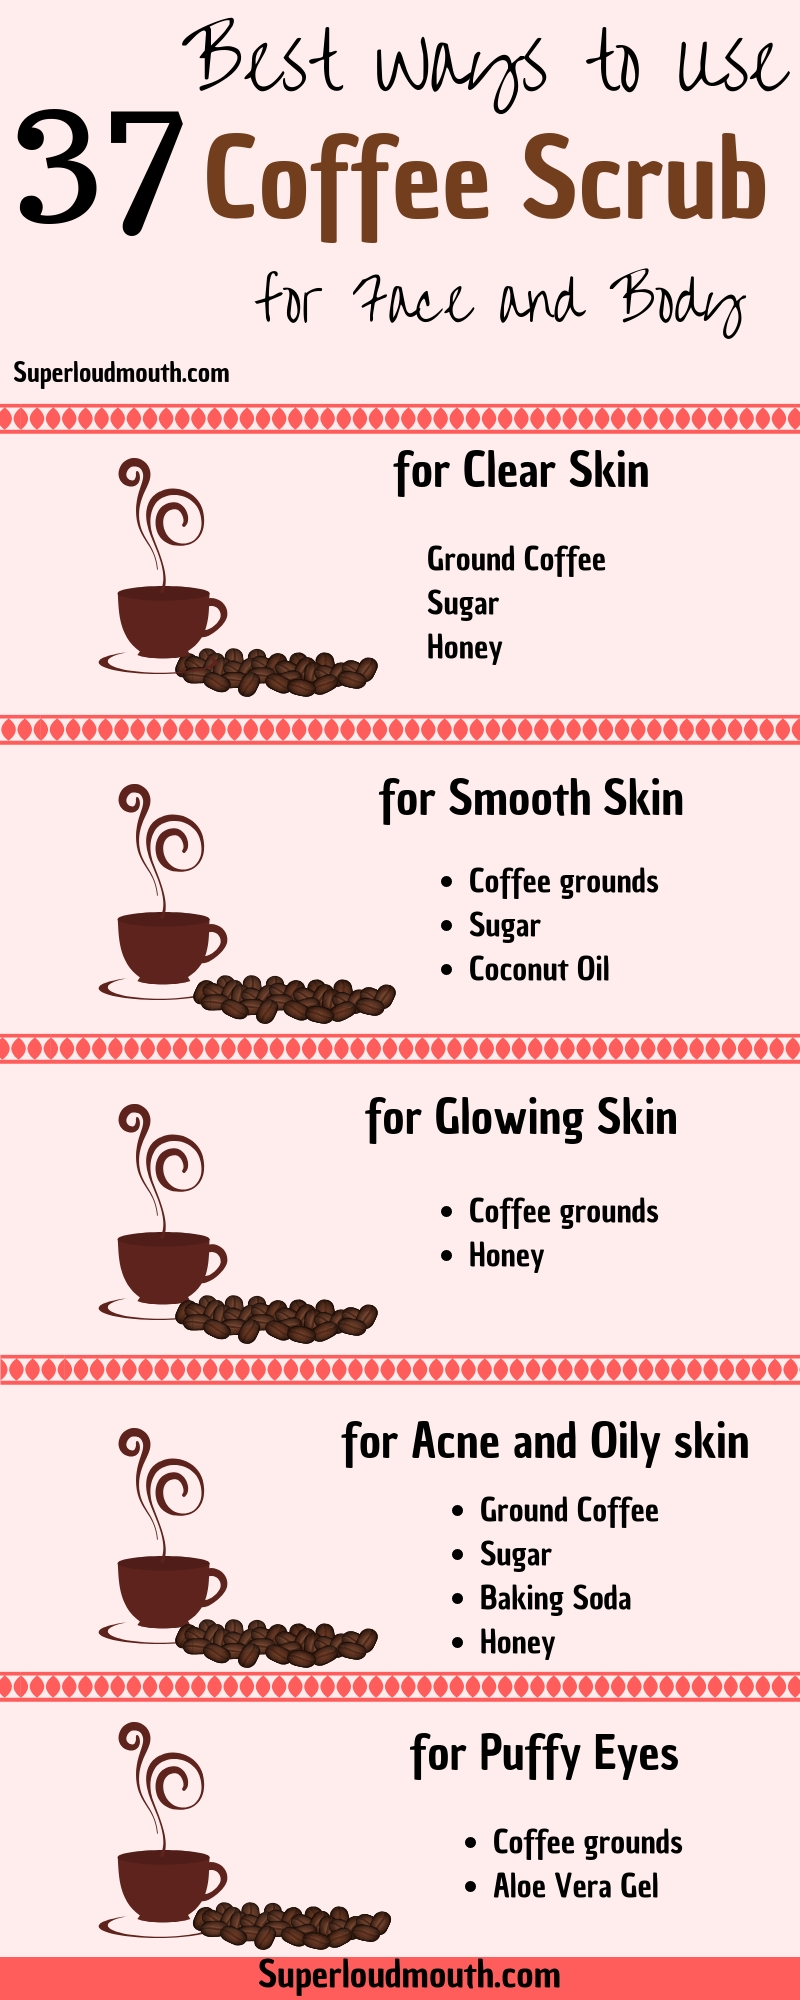 37 Best ways to use coffee scrub for face and body